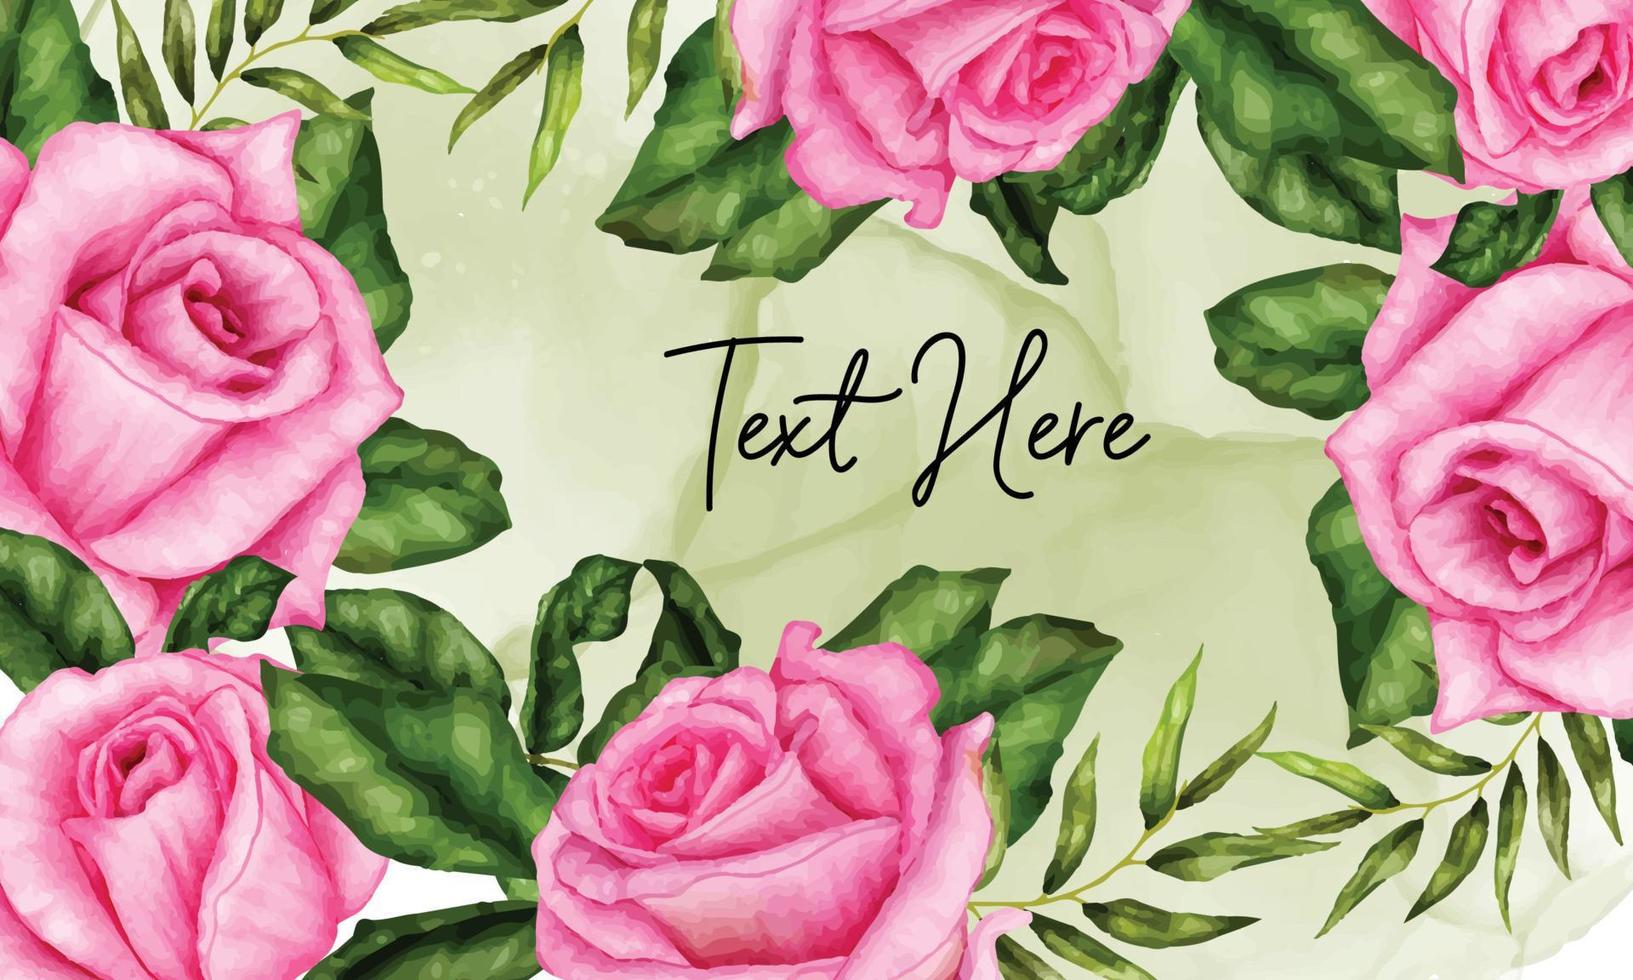 Beautiful hand drawn watercolor flowers background vector